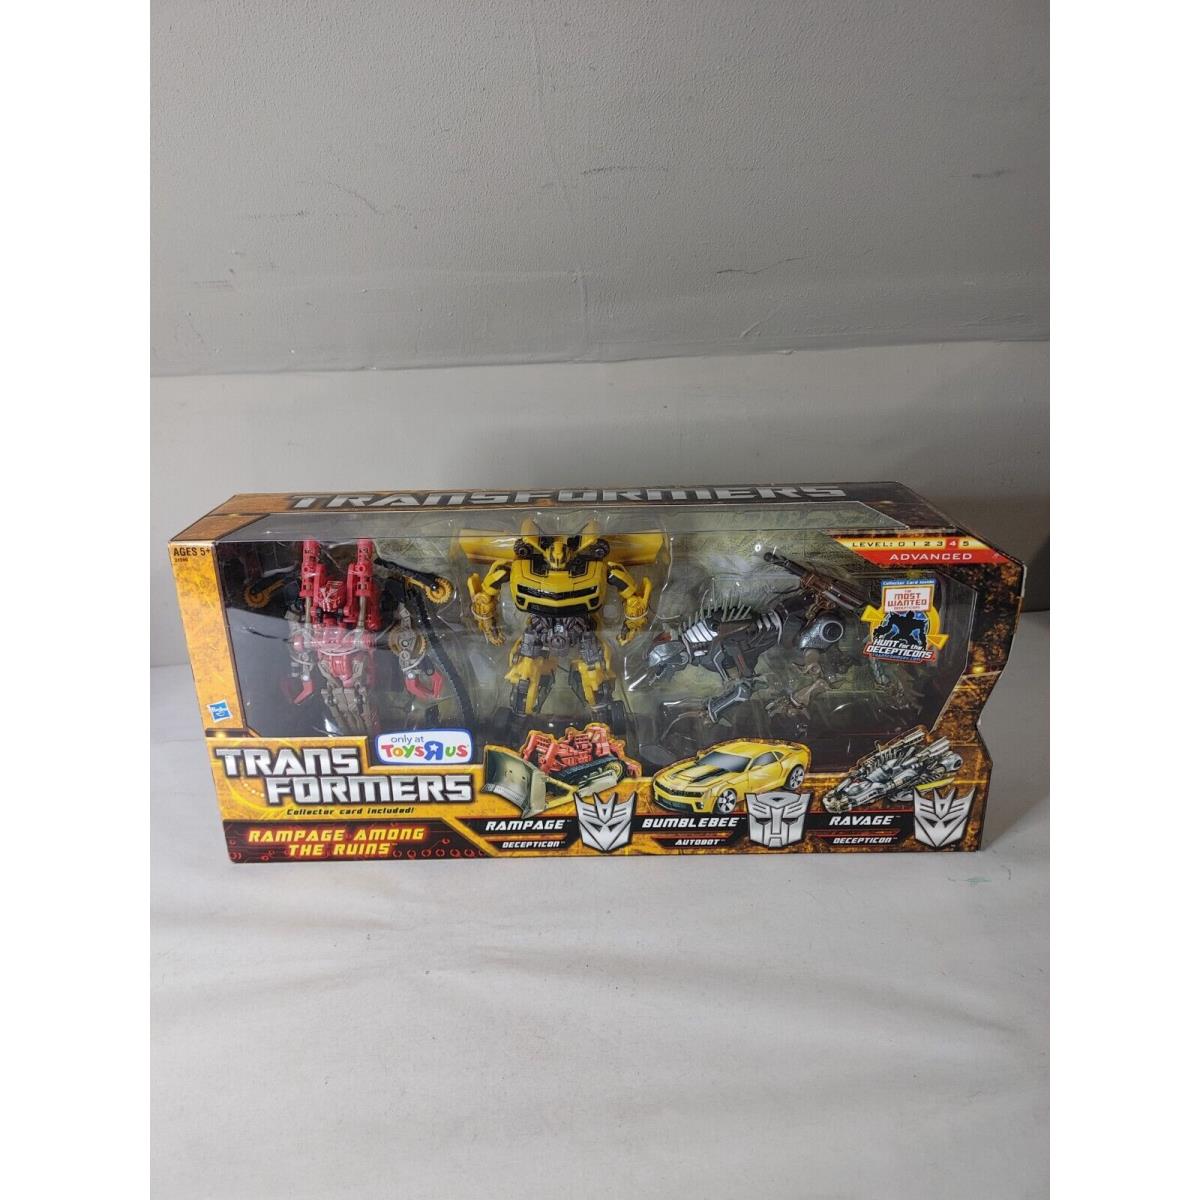 Hasbro Toys R Us Exclusive Transformers Rampage Among The Ruins Set Rare